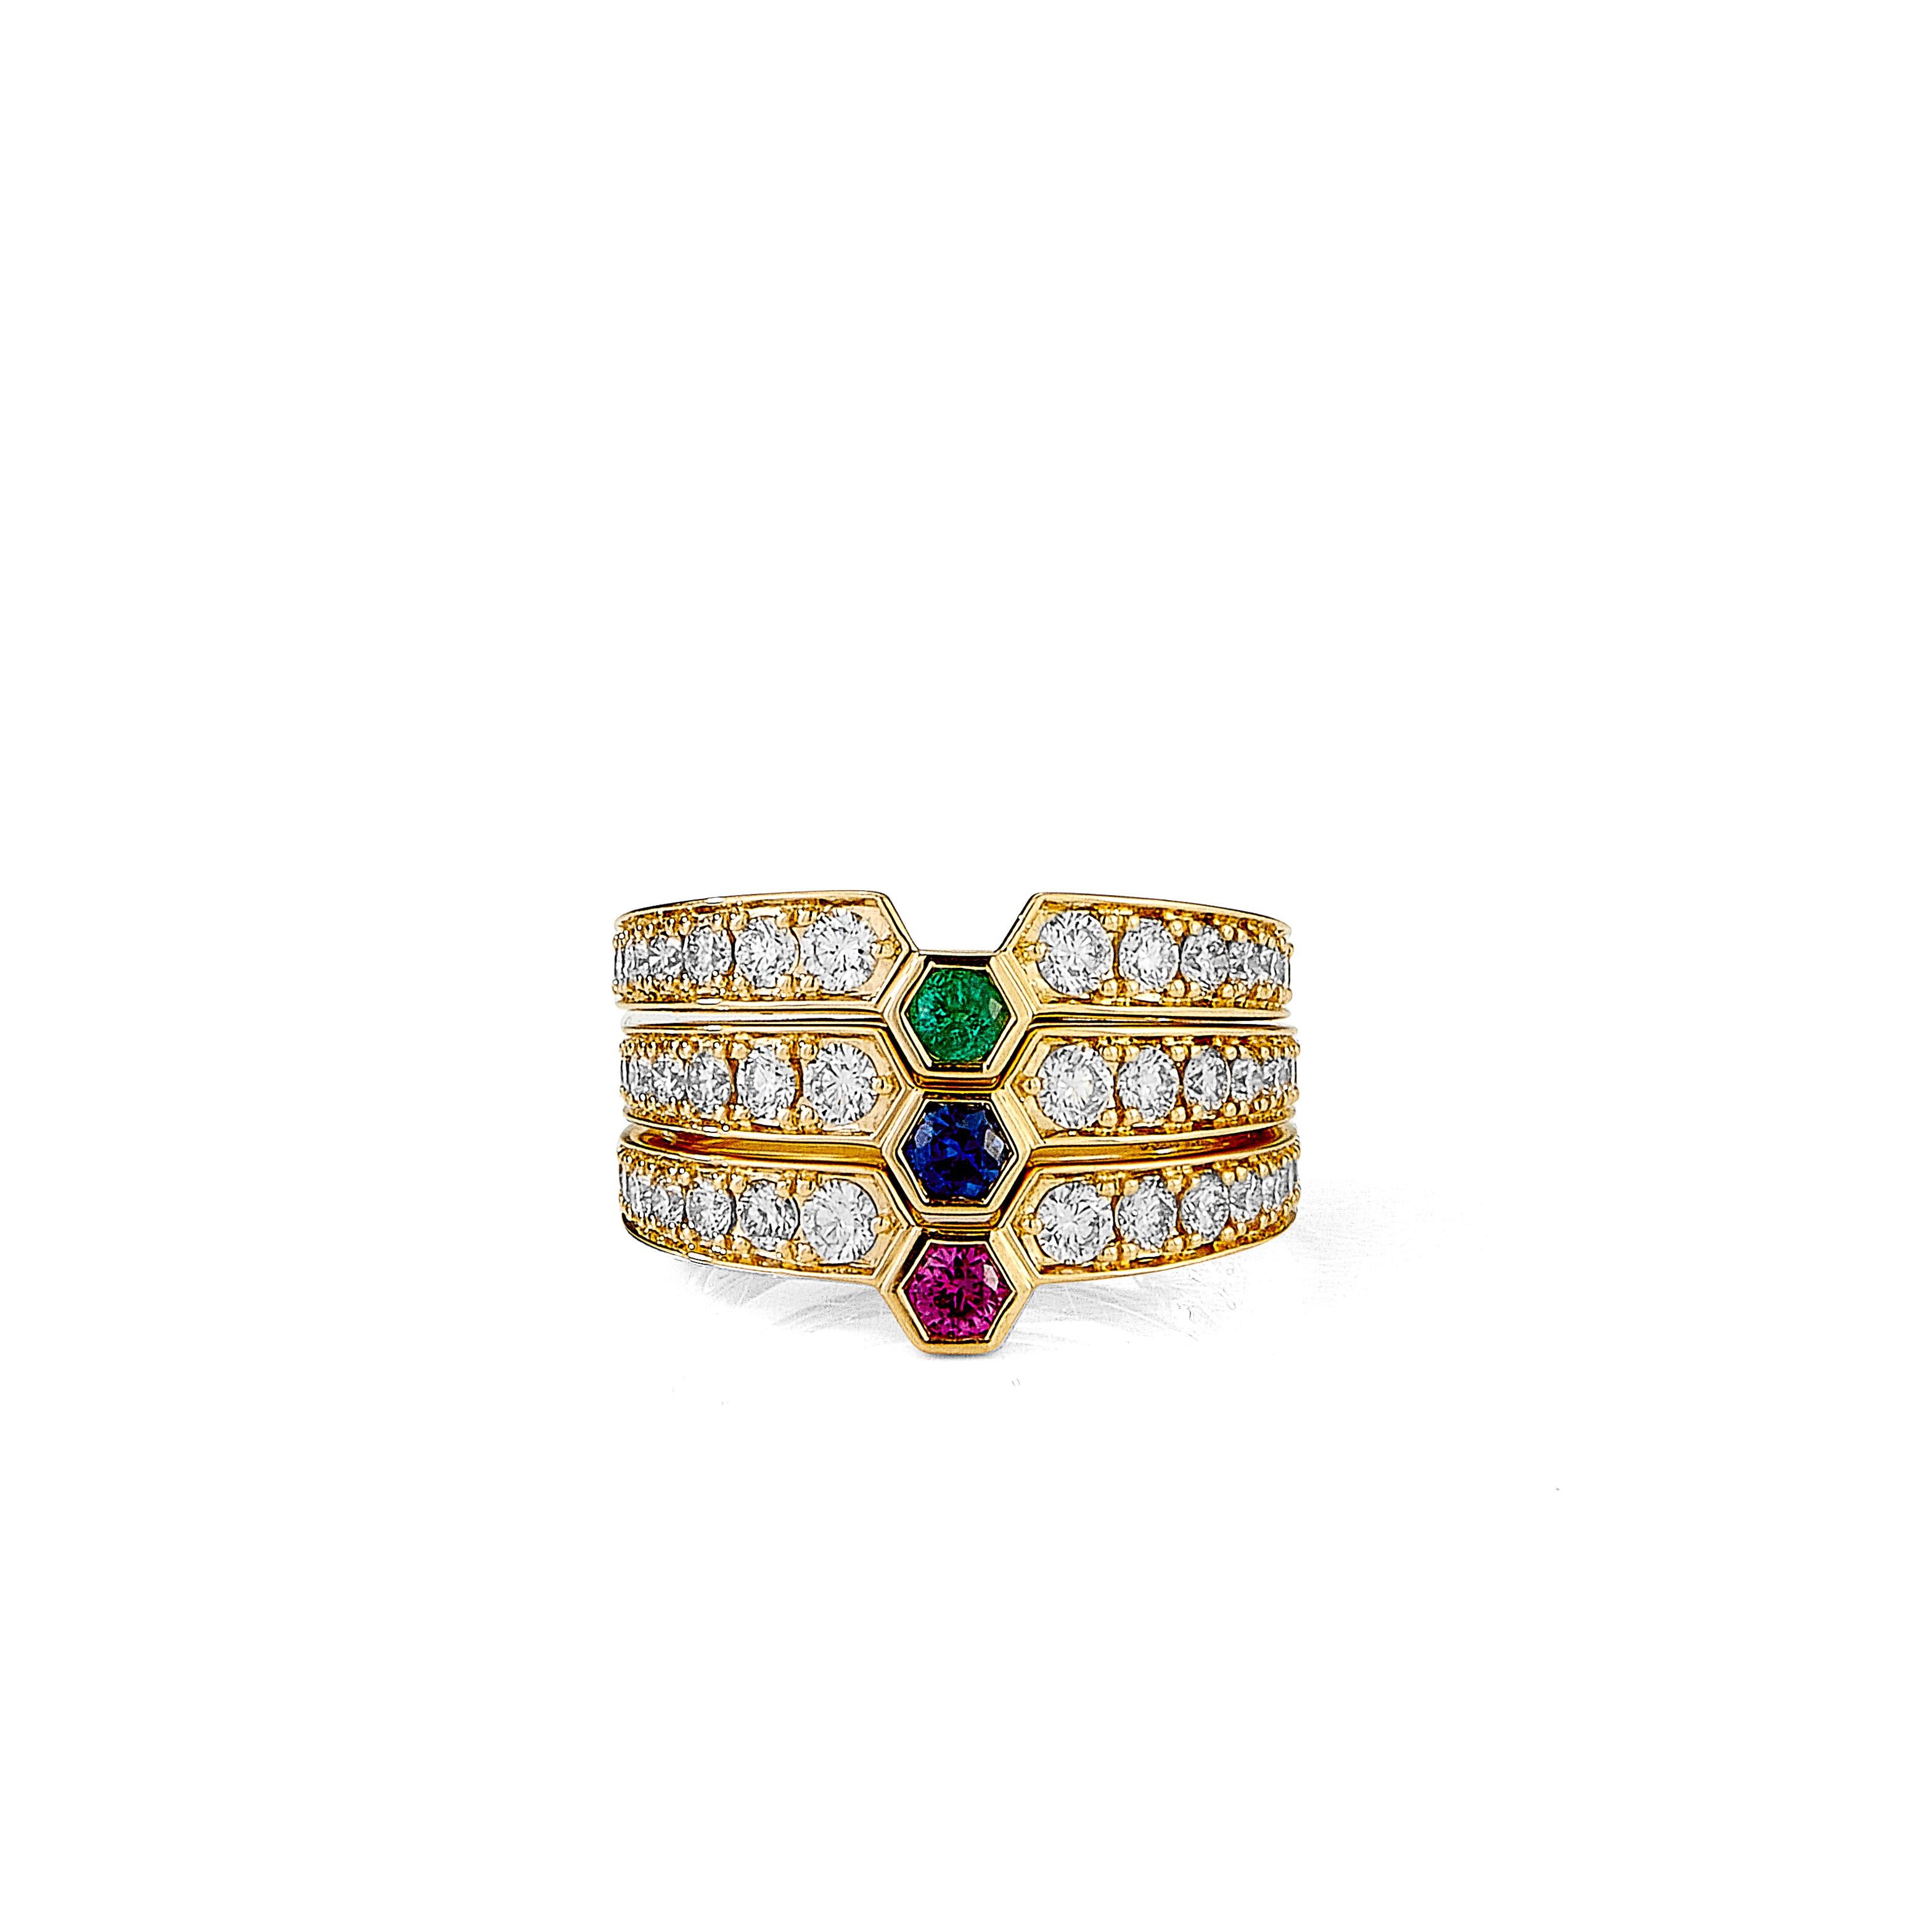 Created in 18 karat yellow gold
Emerald 0.10 carat approx.
Diamonds 0.50 carat approx.
Ring size US 7, can be resized

Crafted from 18 karat yellow gold, this ring features an emerald approximately 0.10 carats and 0.50 carats of diamonds. It is